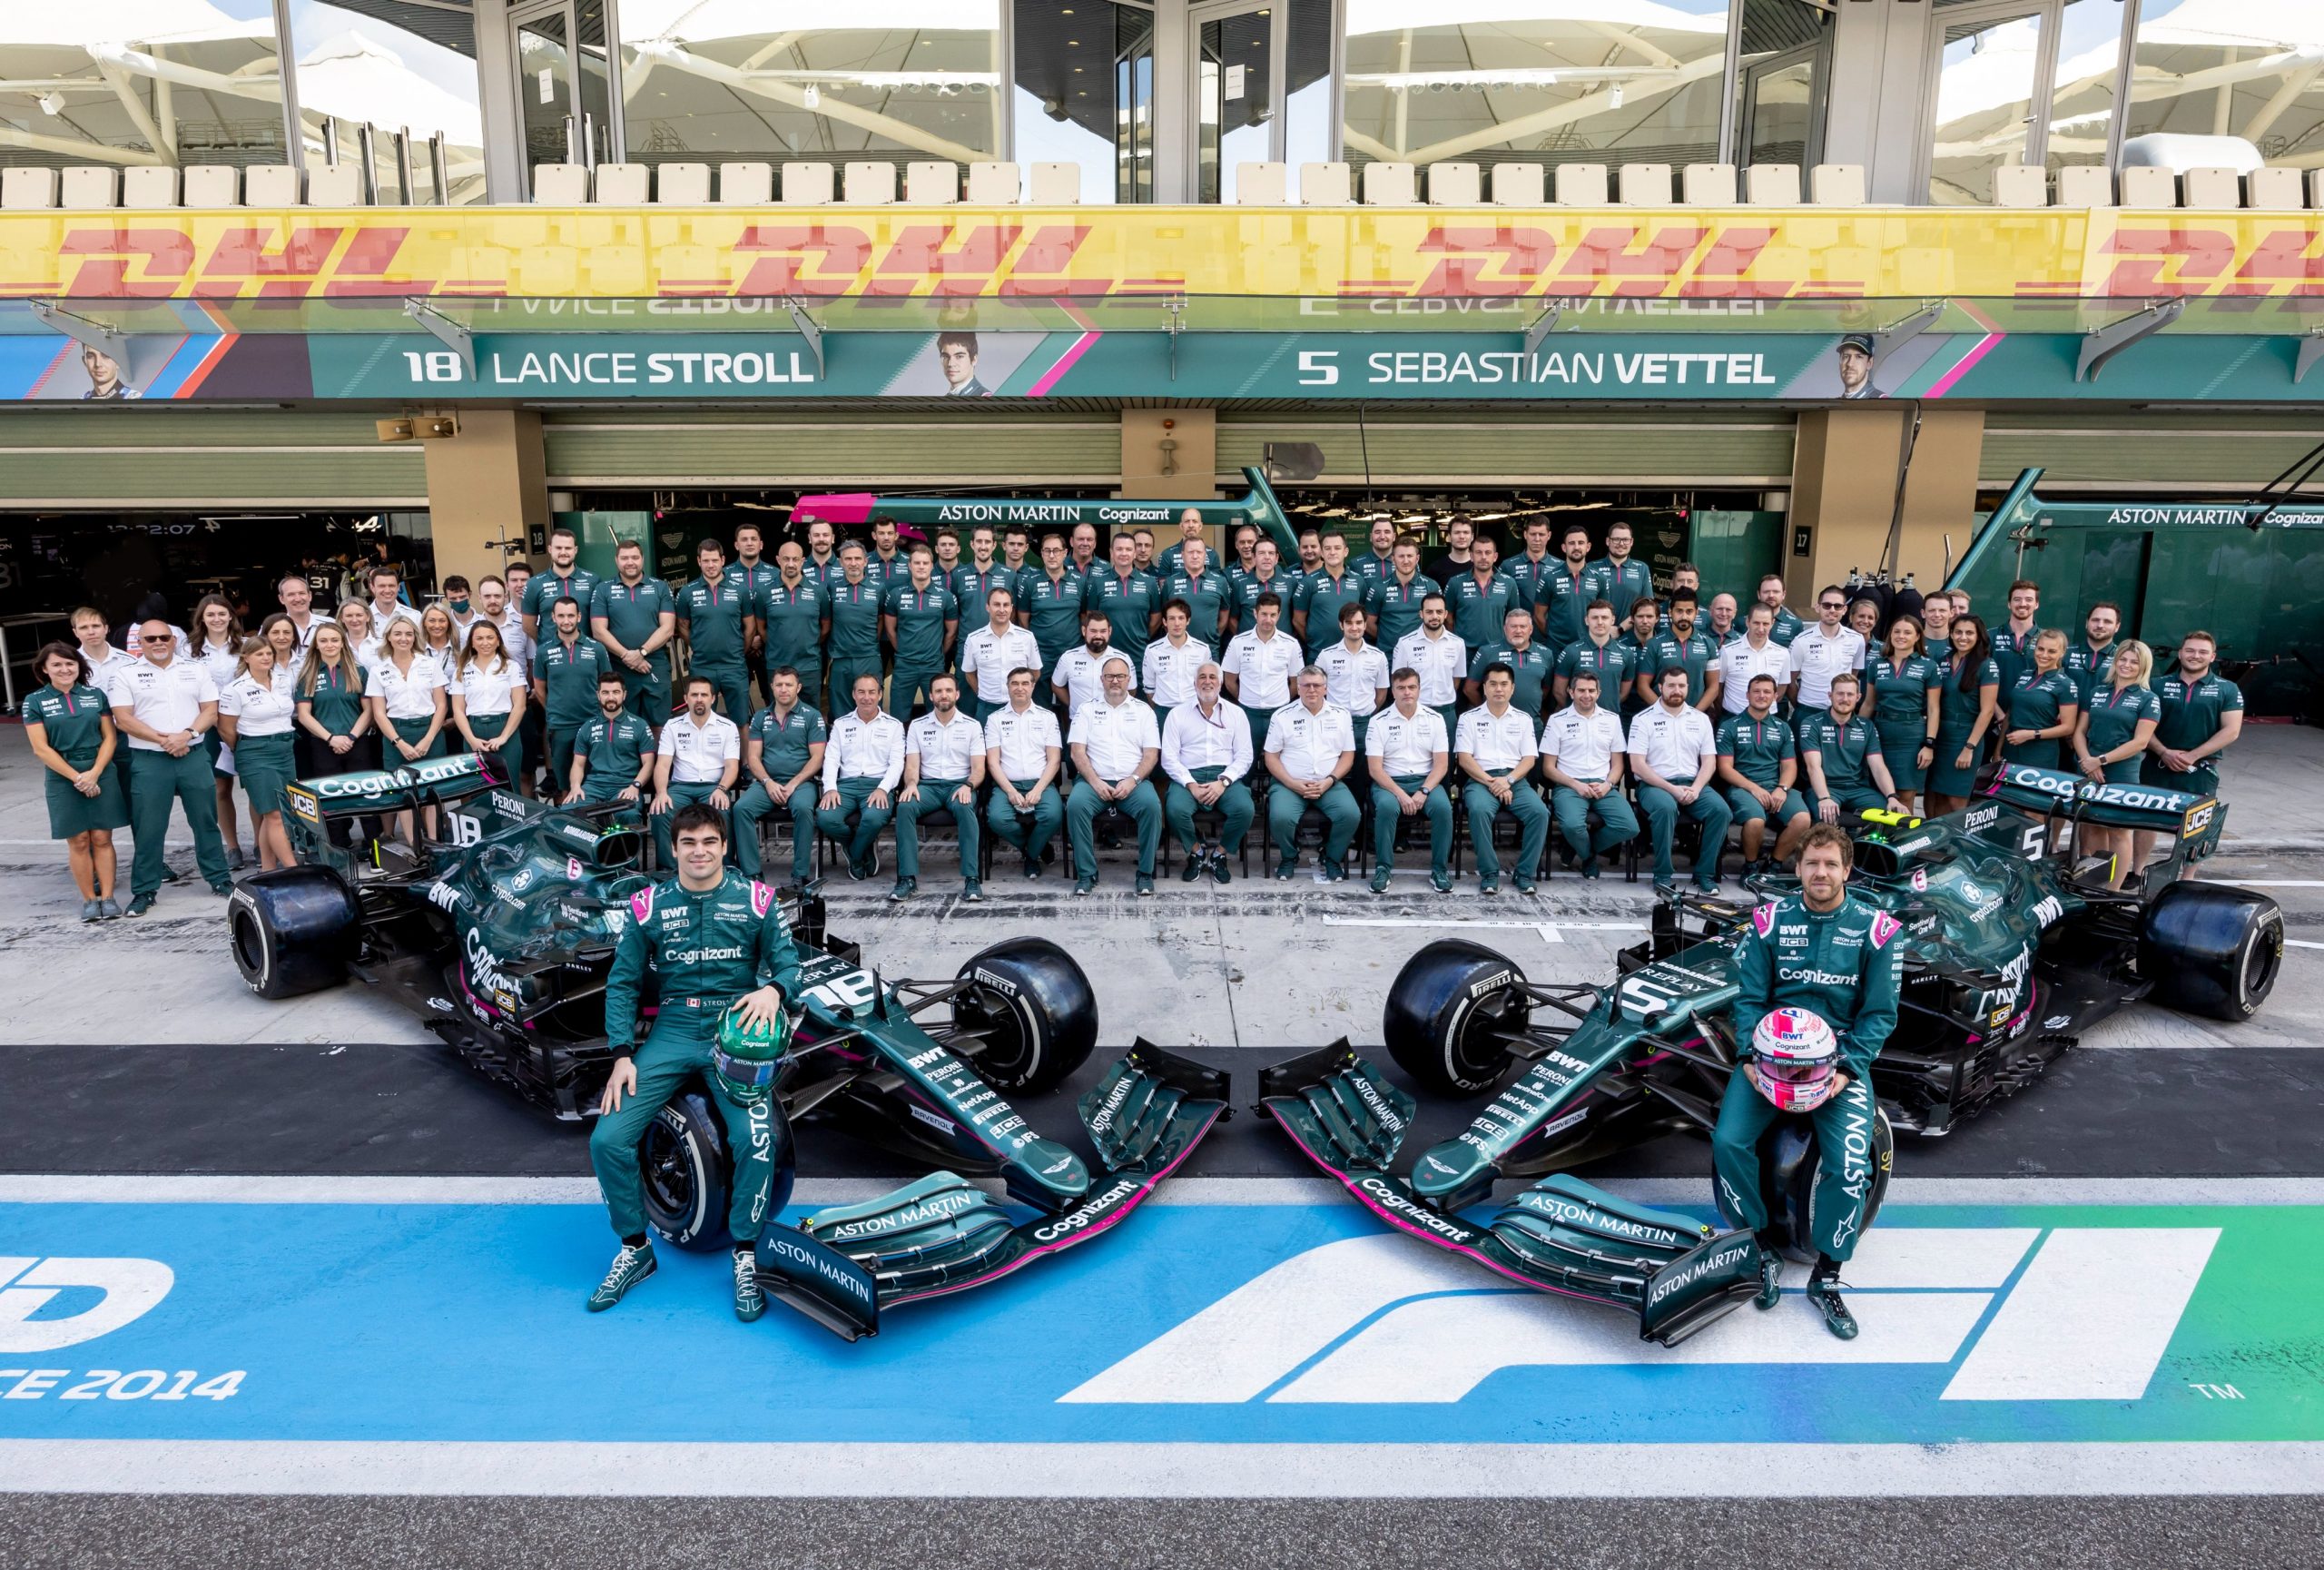 Aston Martin F1 Team Breaks Free from Uncertainty, Charts New Course